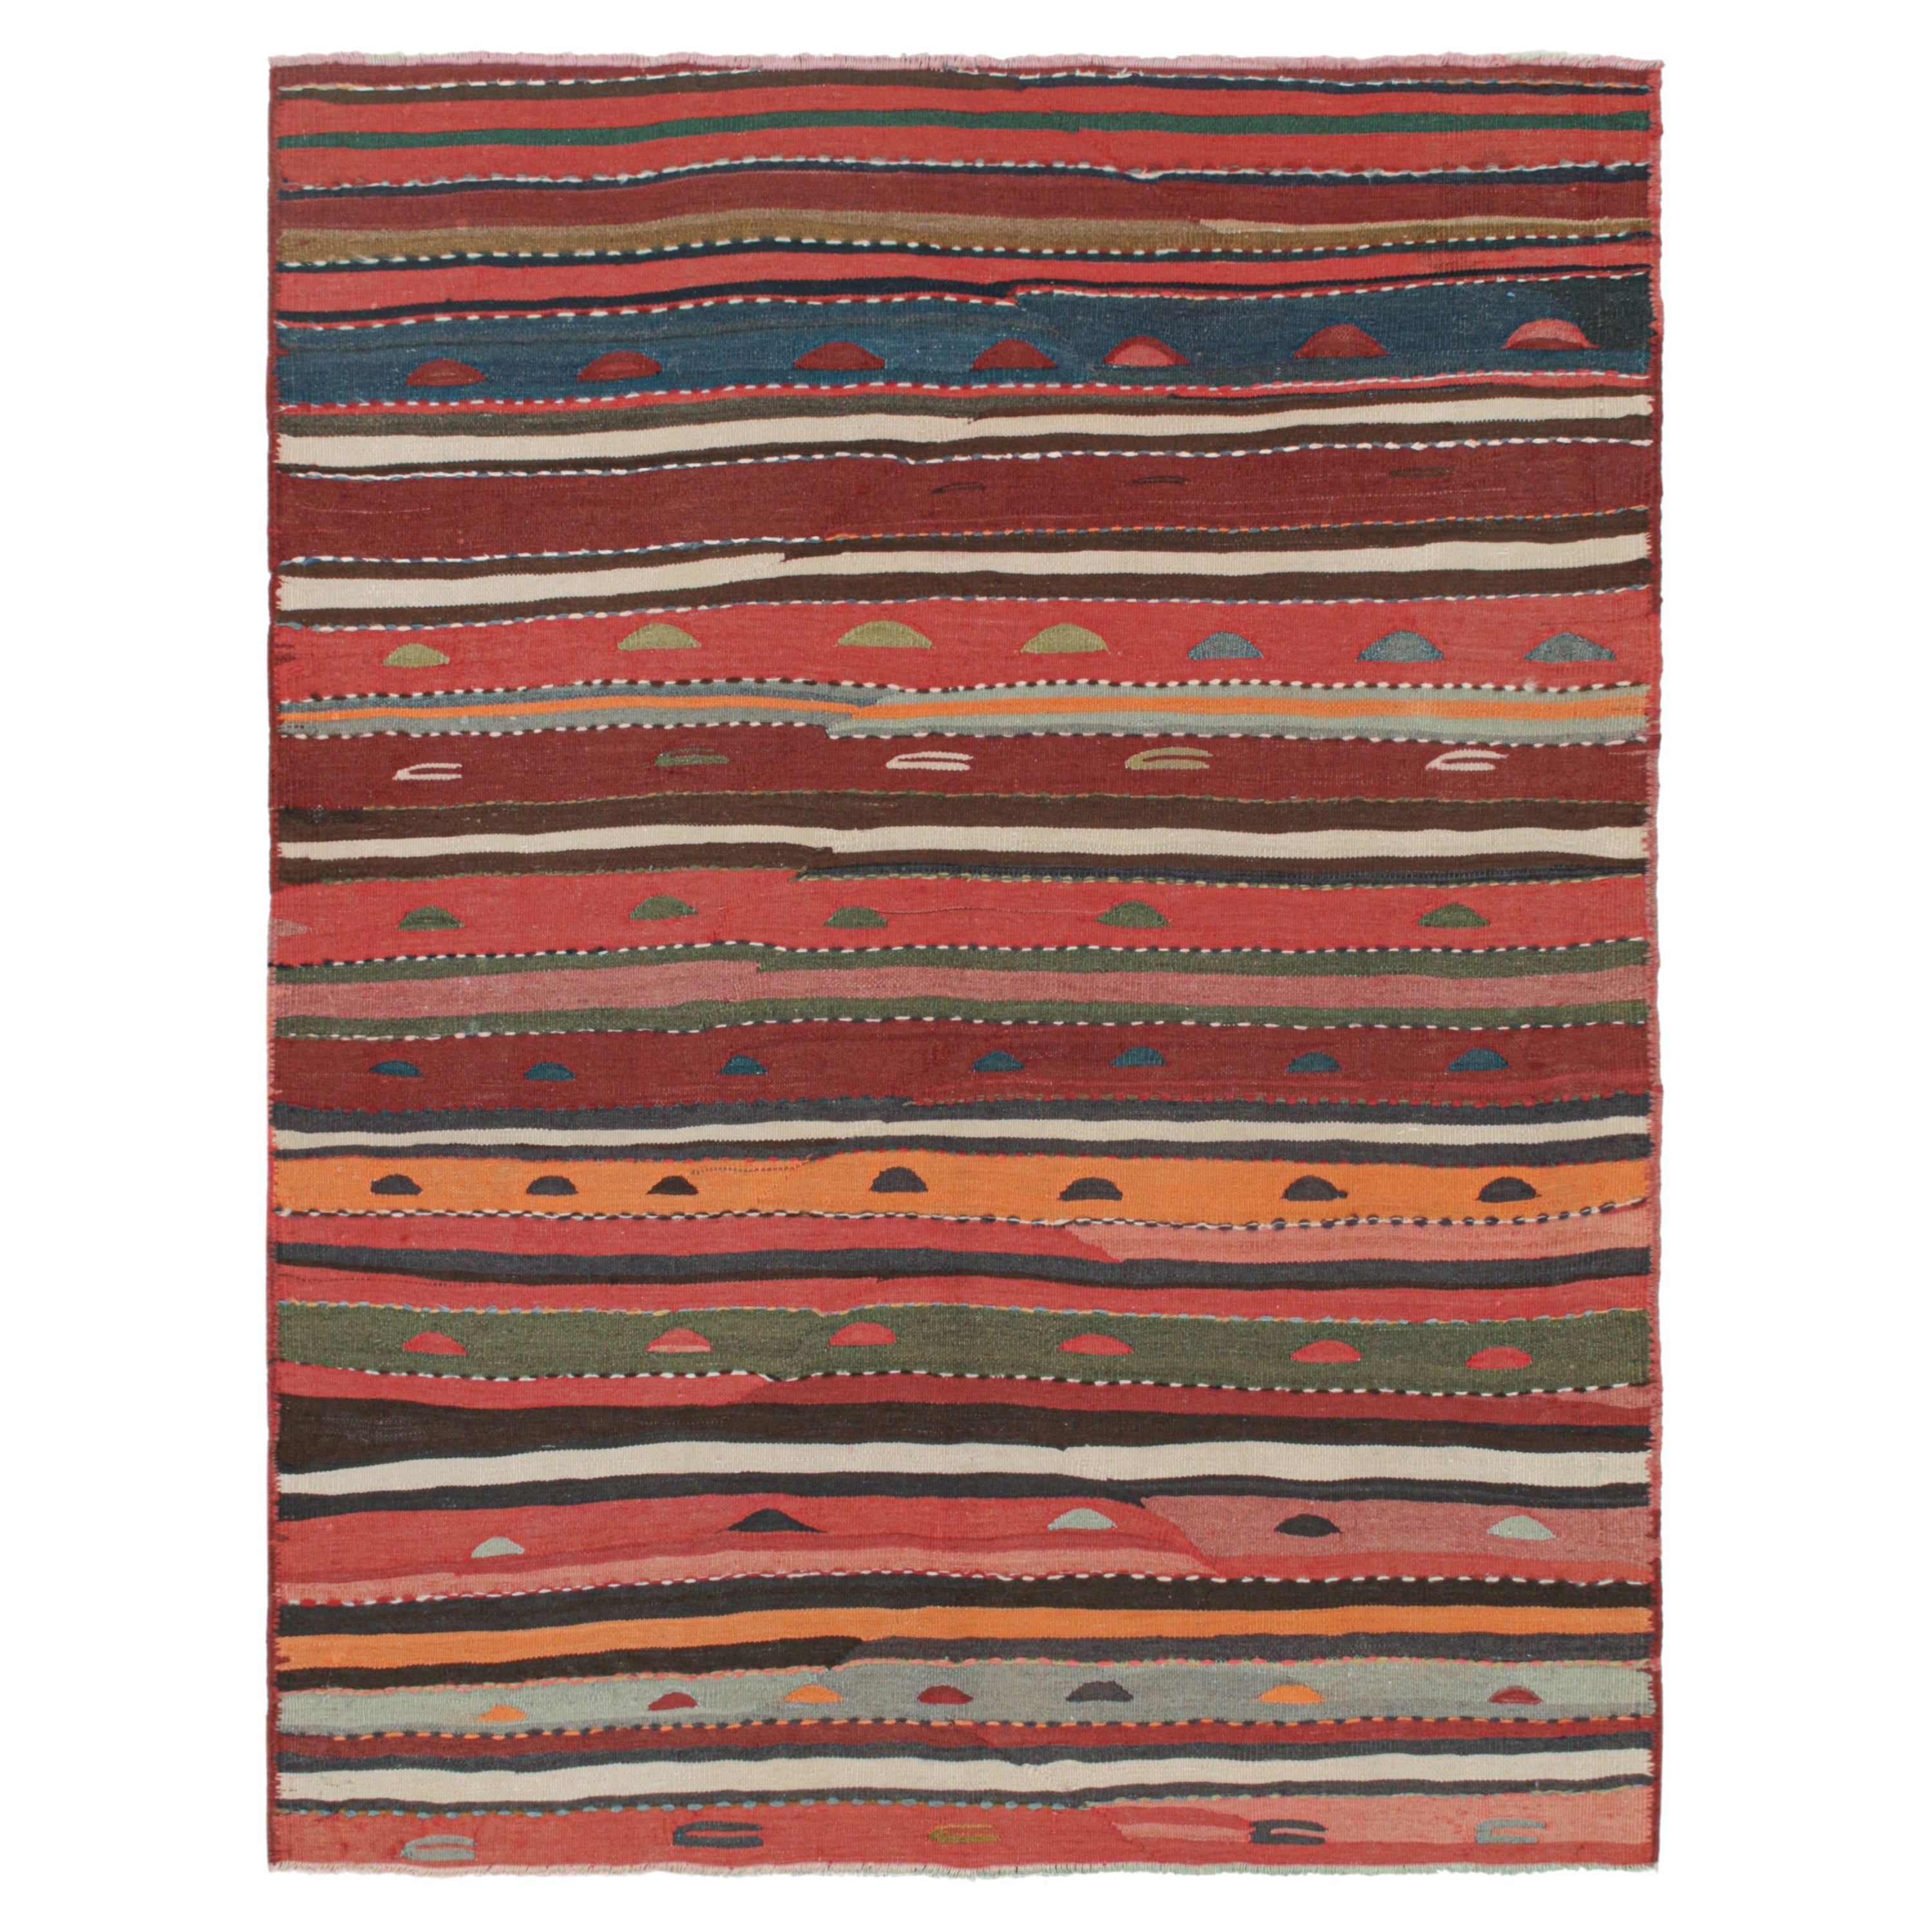 Vintage Northwest Persian Kilim with Colorful Geometric Patterns